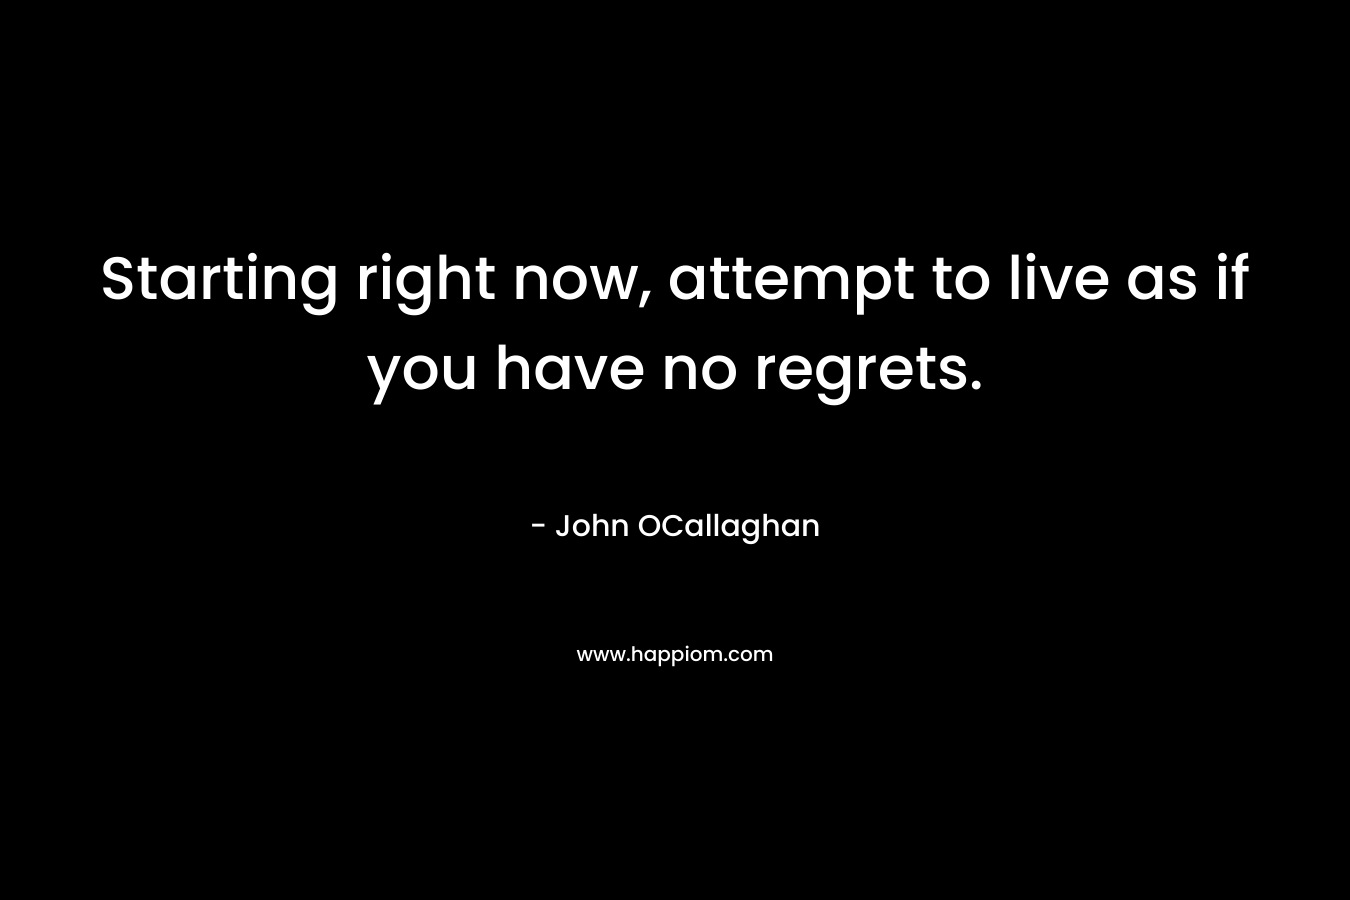 Starting right now, attempt to live as if you have no regrets. – John OCallaghan